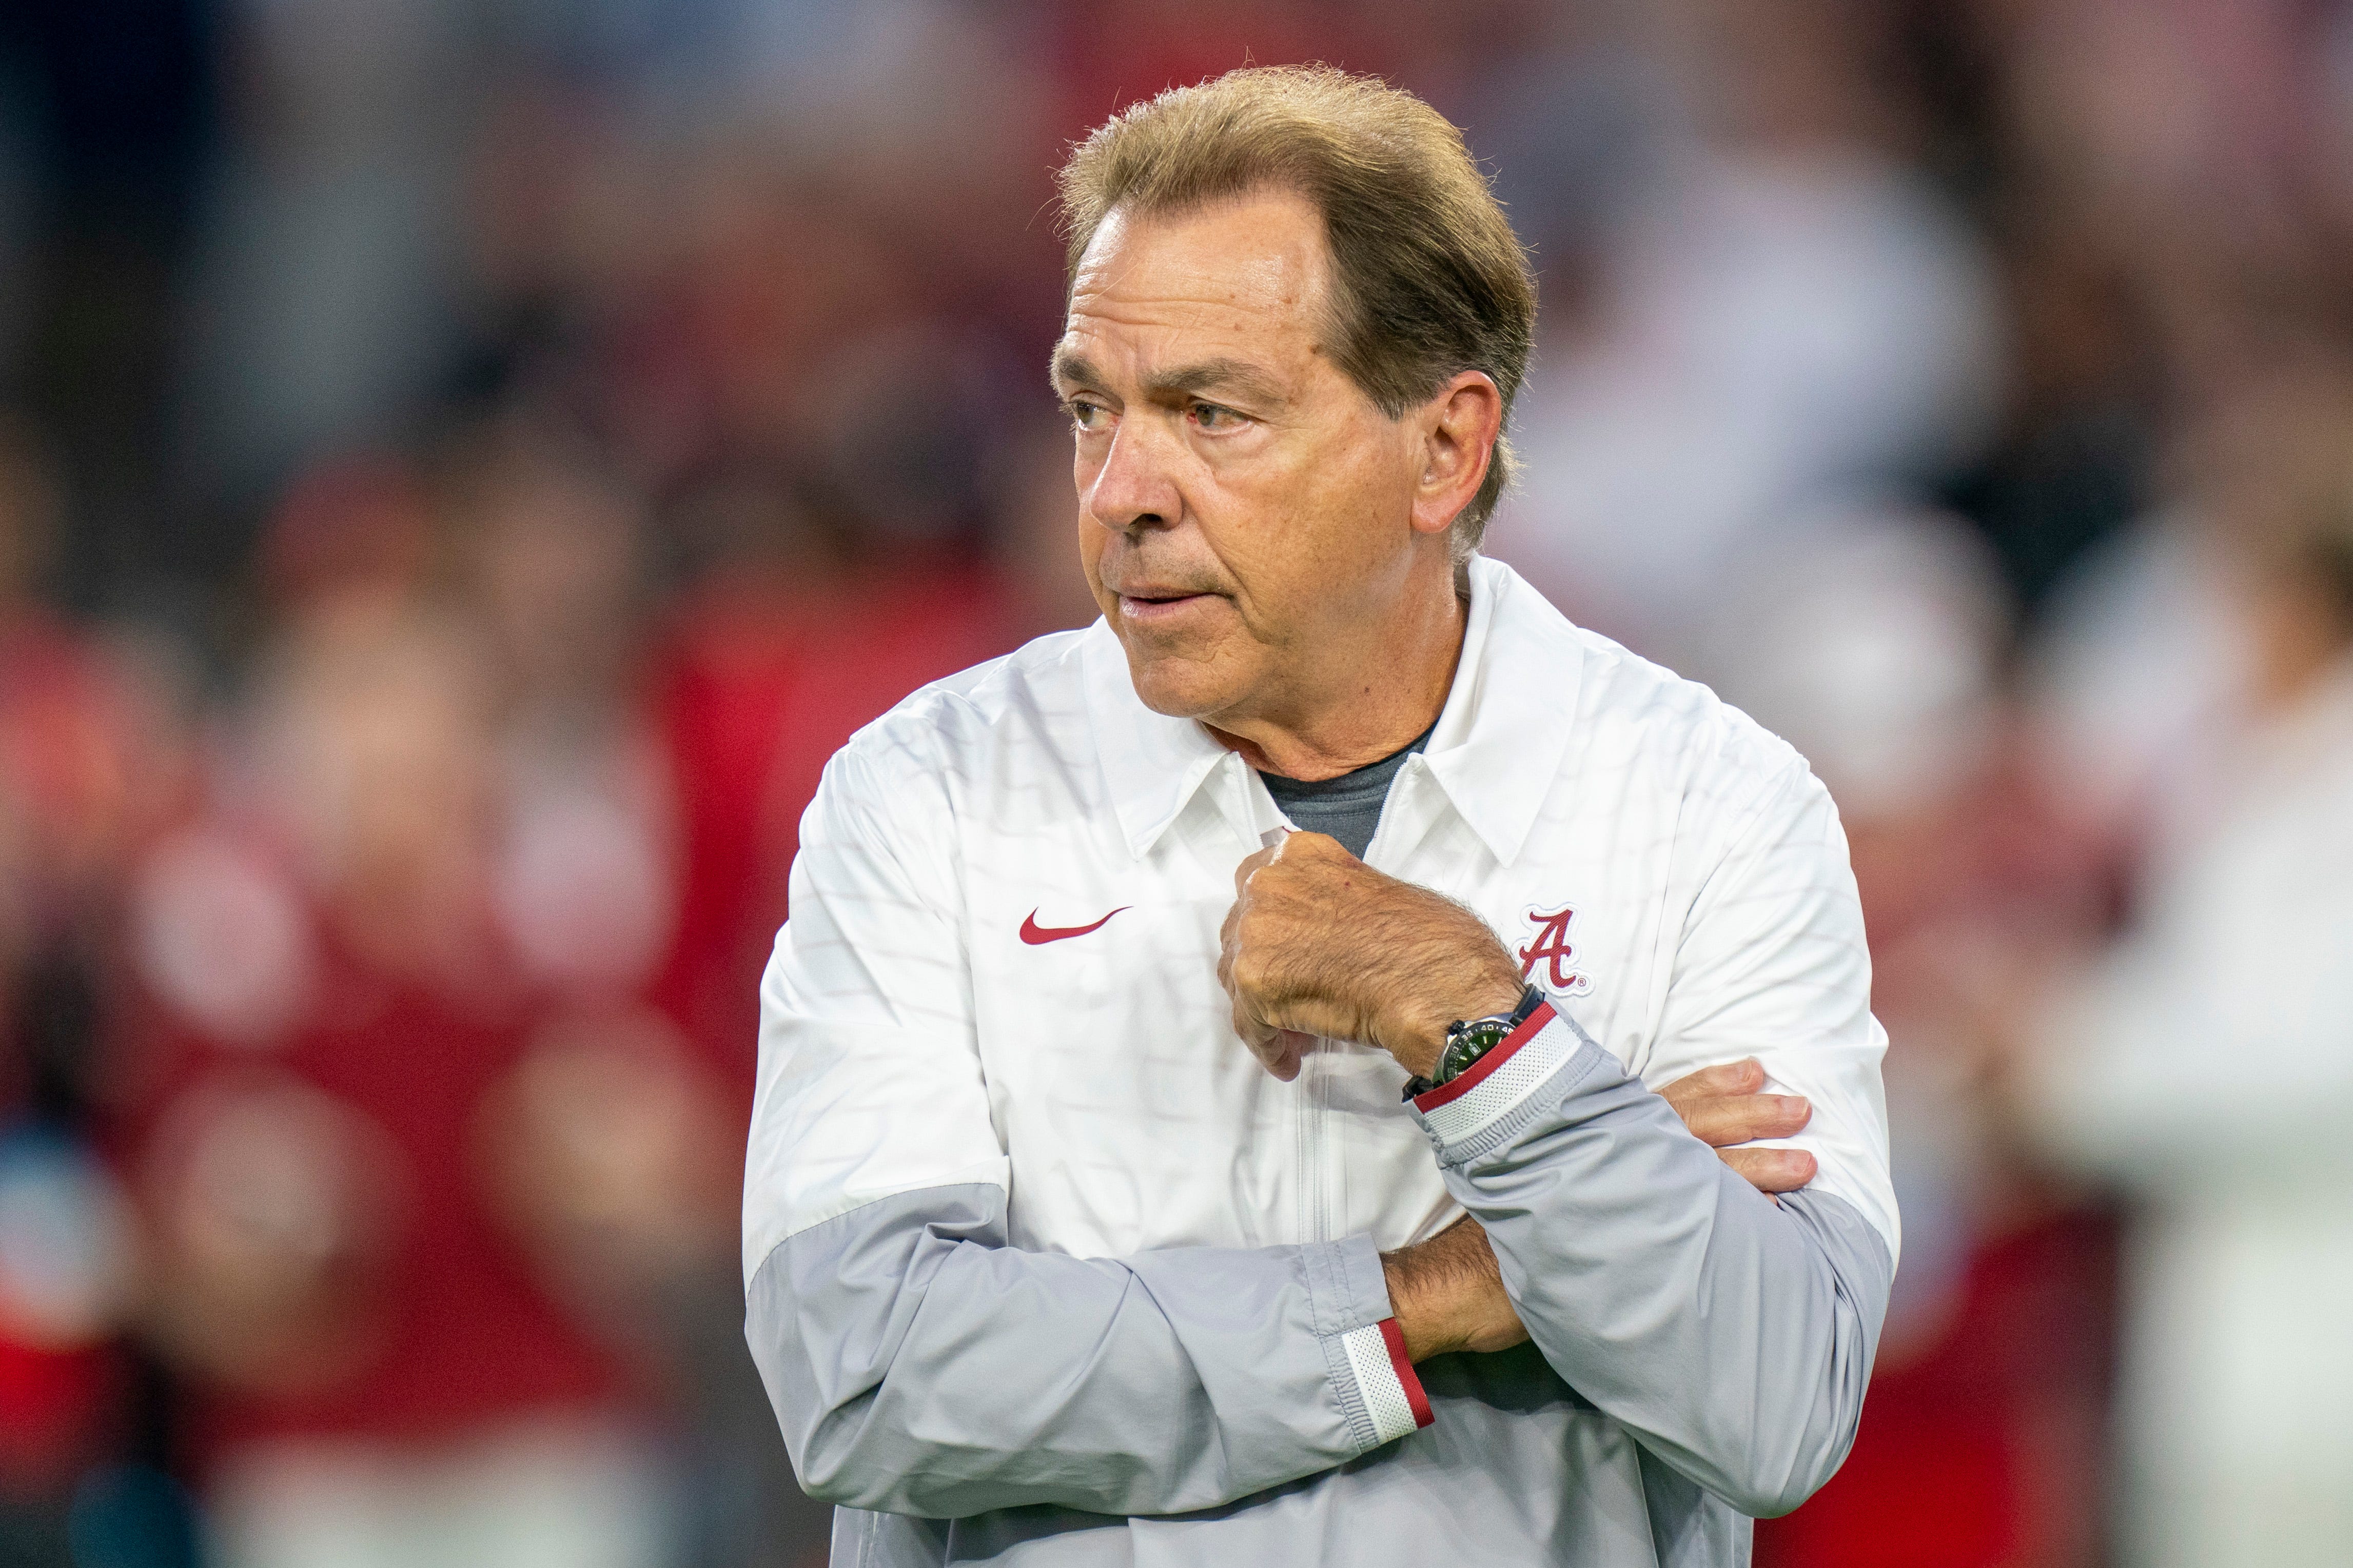 Oct 8, 2022; Tuscaloosa, Alabama, USA;  Alabama Crimson Tide head coach Nick Saban prior to a game against the Texas A&M Aggies at Bryant-Denny Stadium. Mandatory Credit: Marvin Gentry-USA TODAY Sports